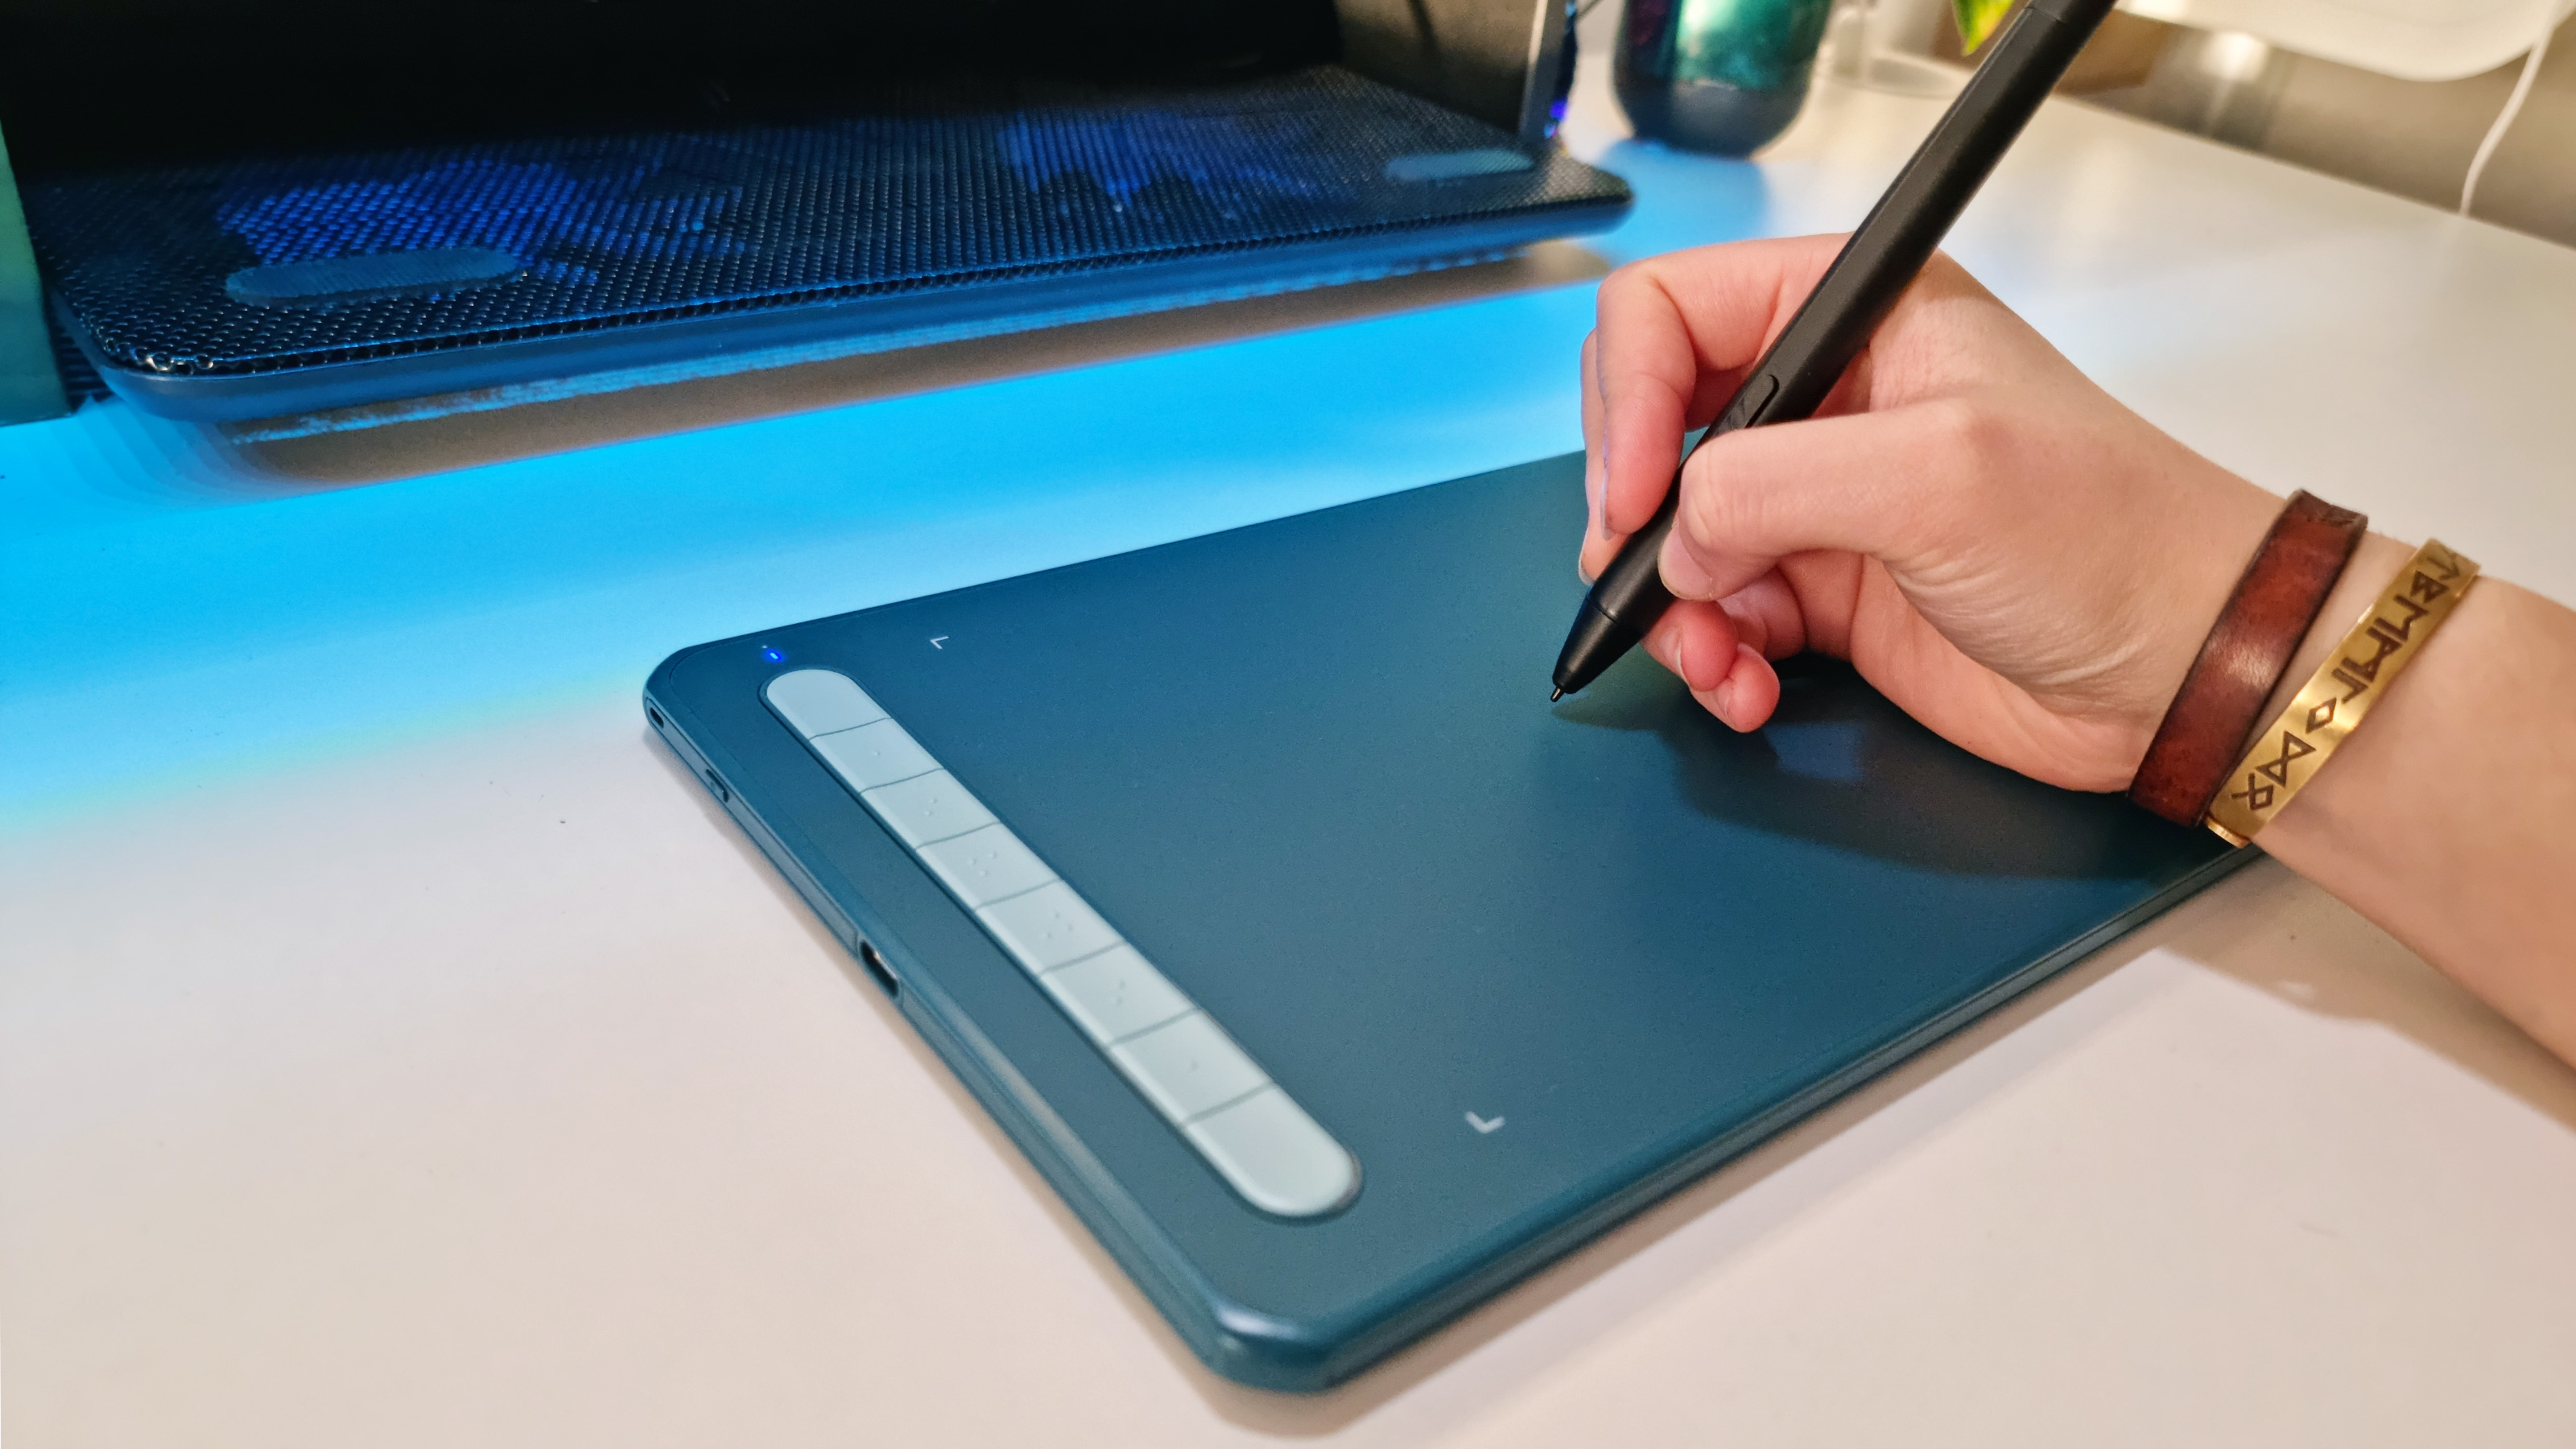 XP-Pen Deco MW Pen Tablet review: an affordable yet capable entry-level